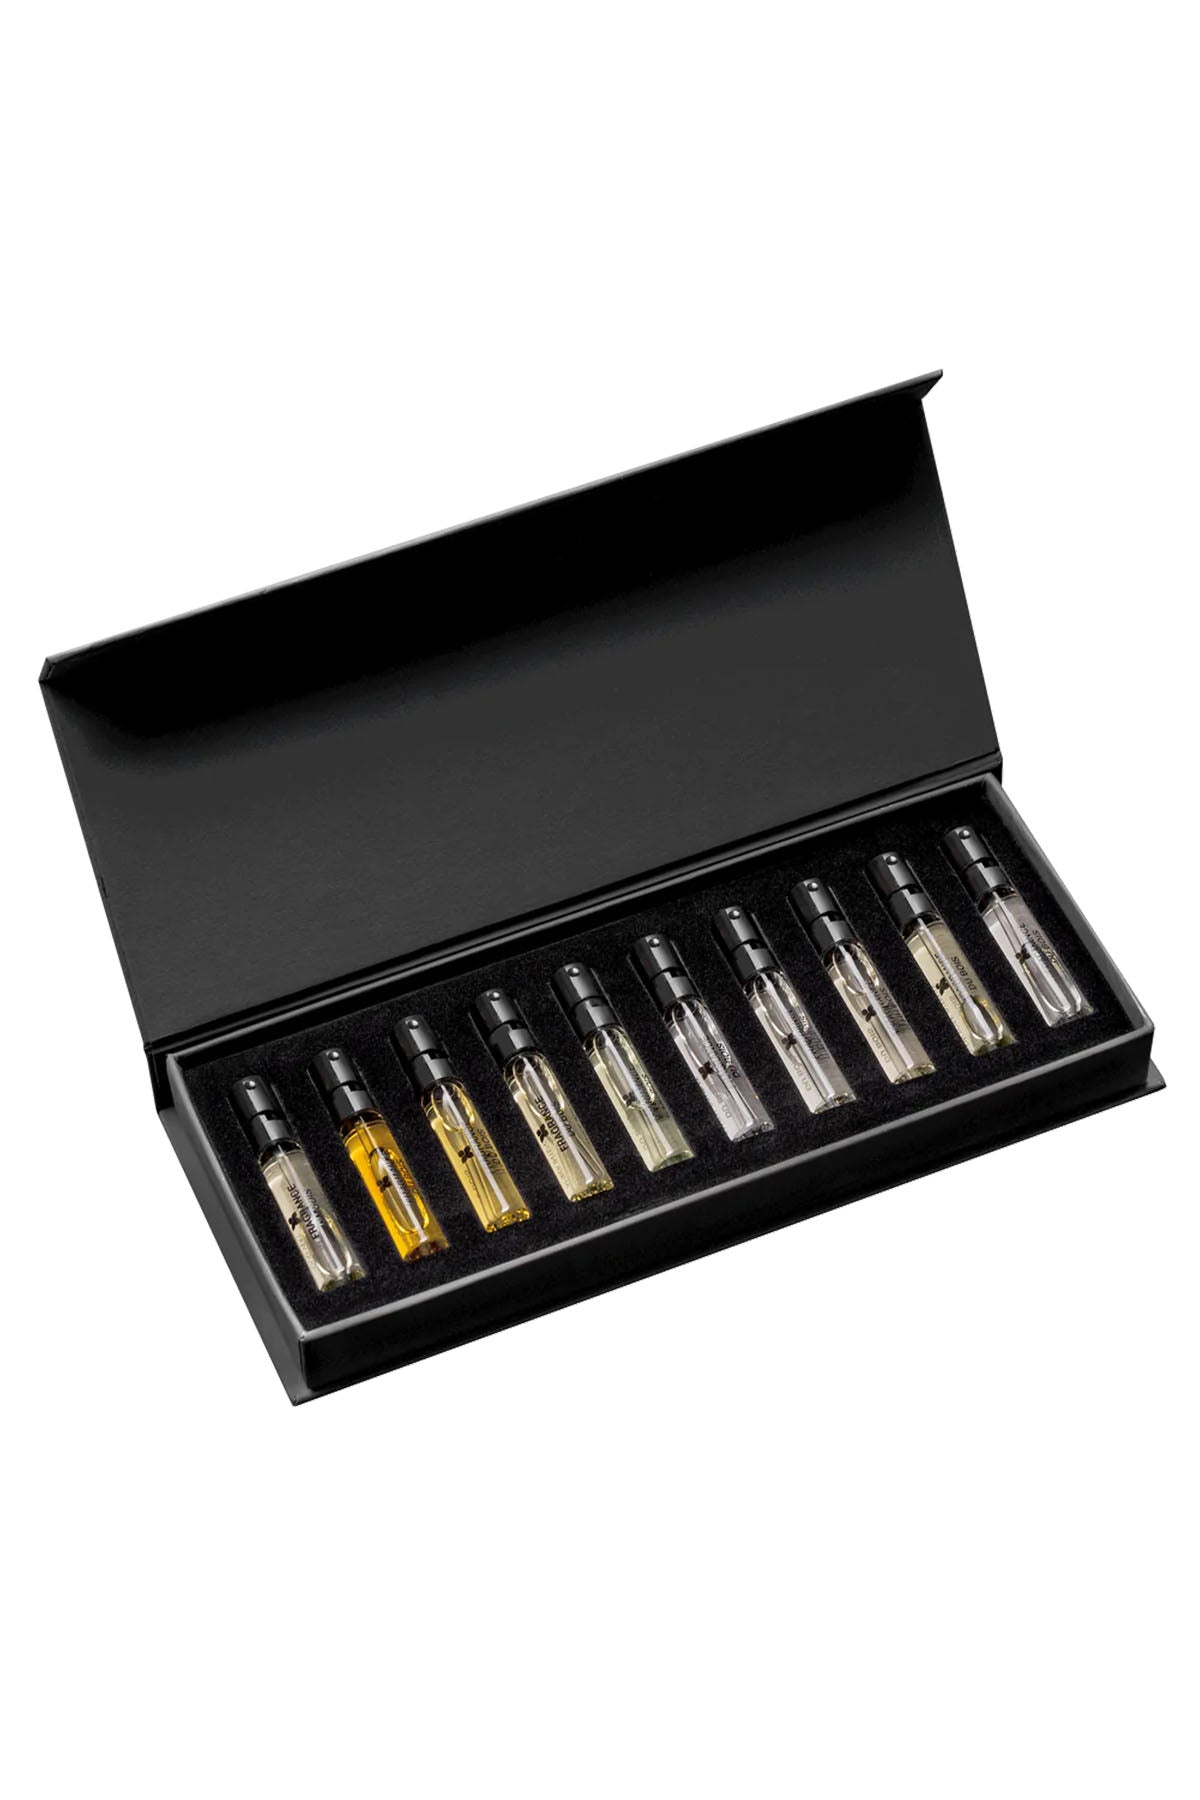 Fragrance Du Bois New Releases Discovery Set 10 x 2ML